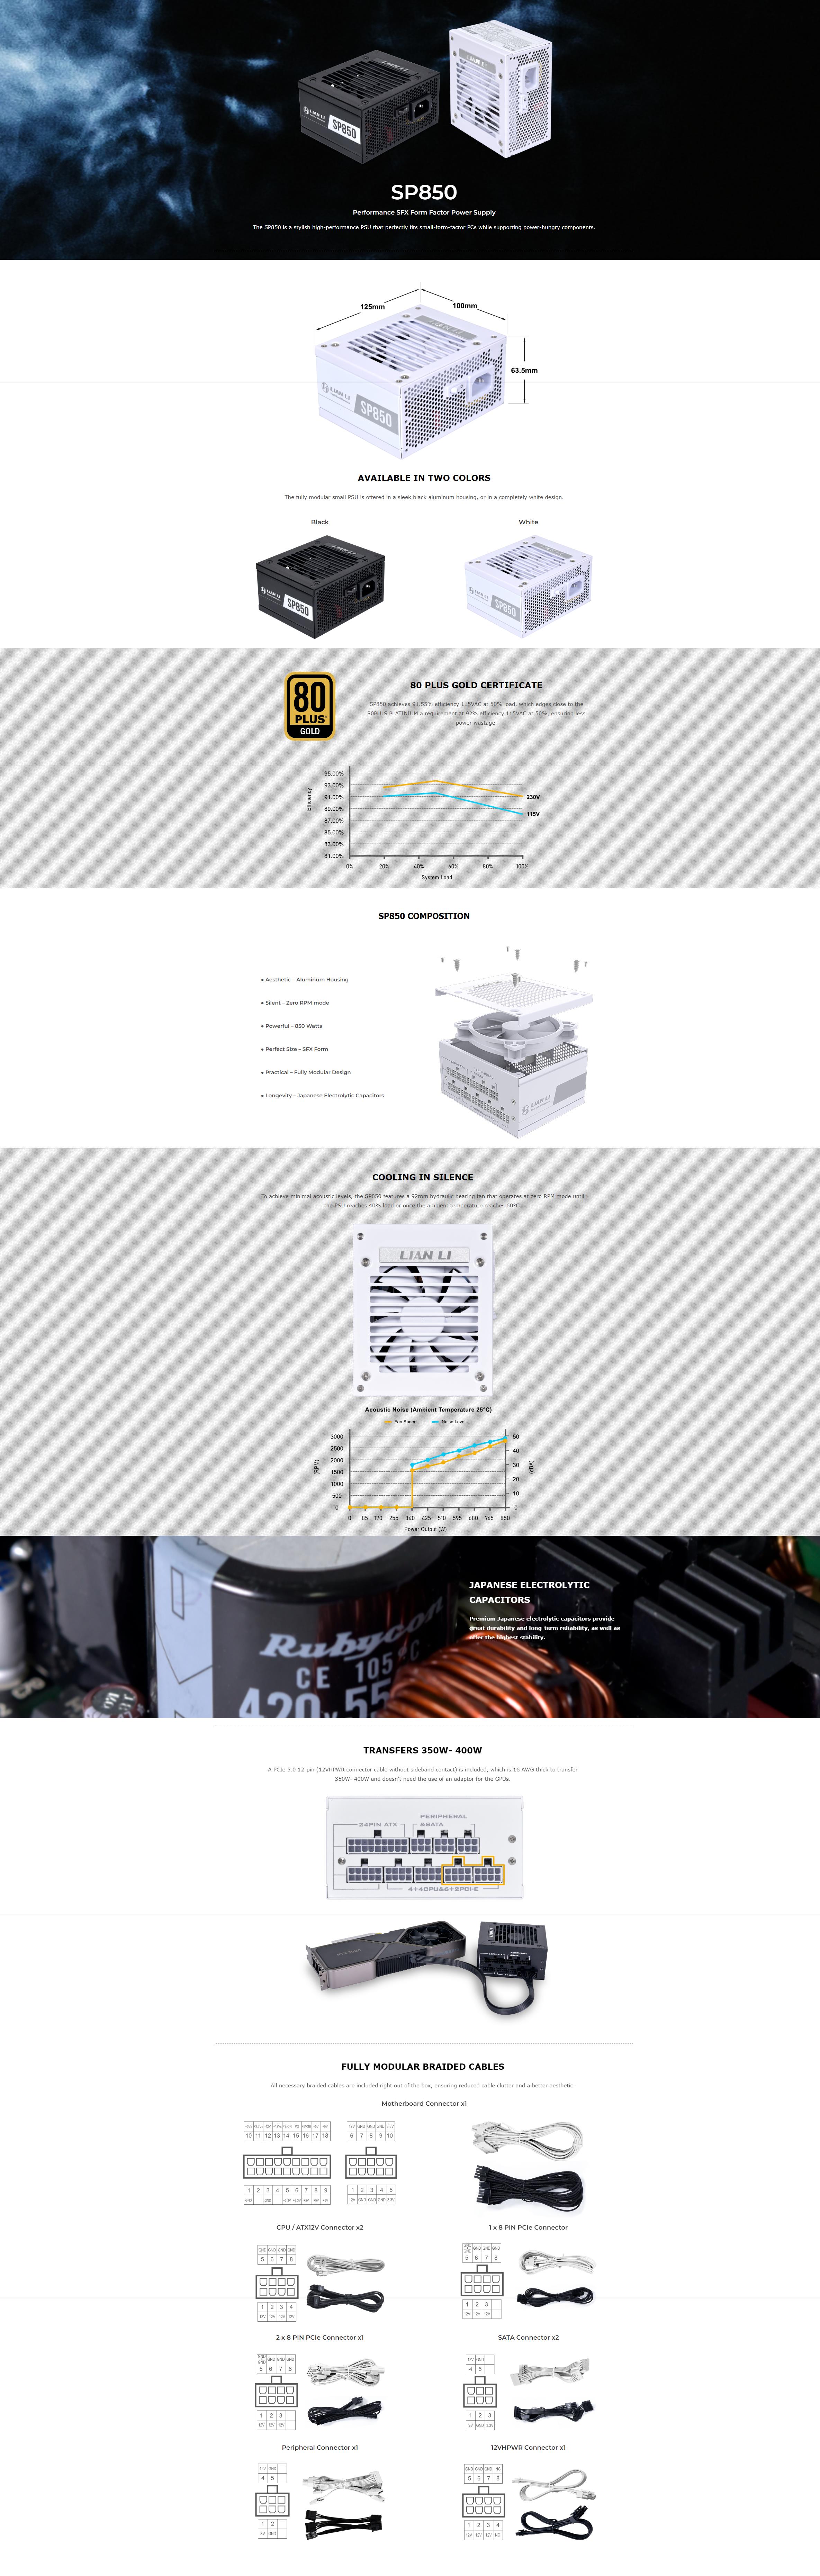 A large marketing image providing additional information about the product Lian Li SP850B 850W Gold SFX Modular PSU - Black - Additional alt info not provided